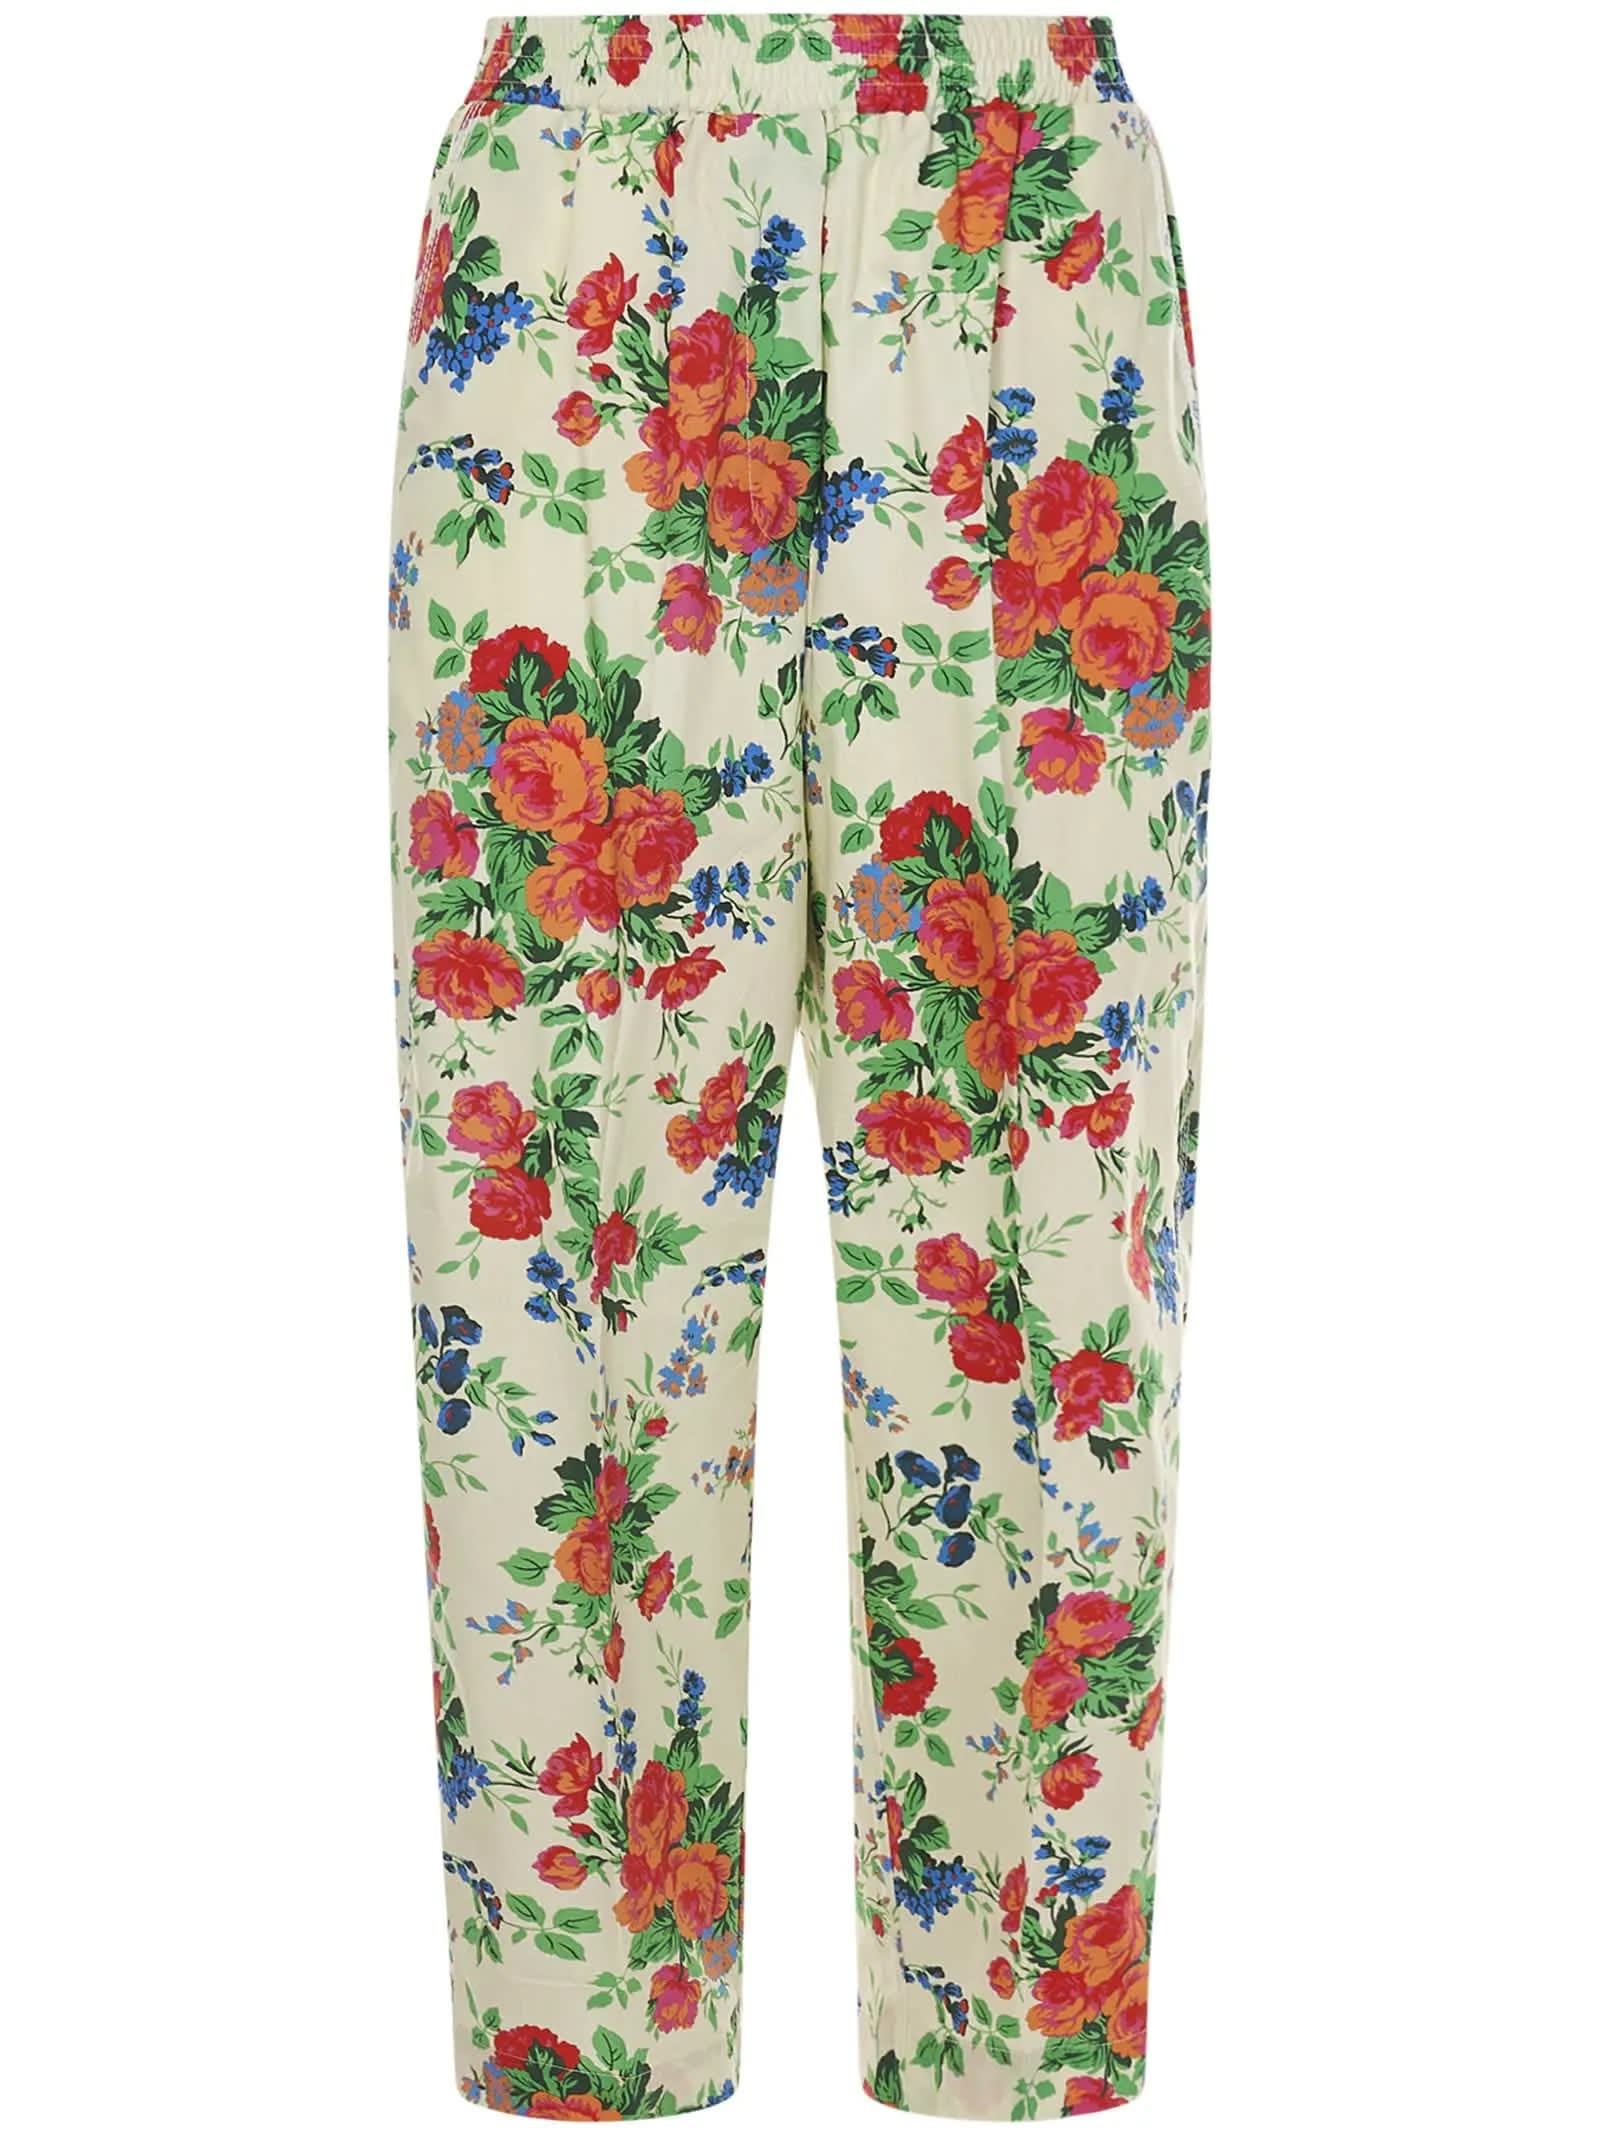 Mauro Grifoni Floral Print Trousers